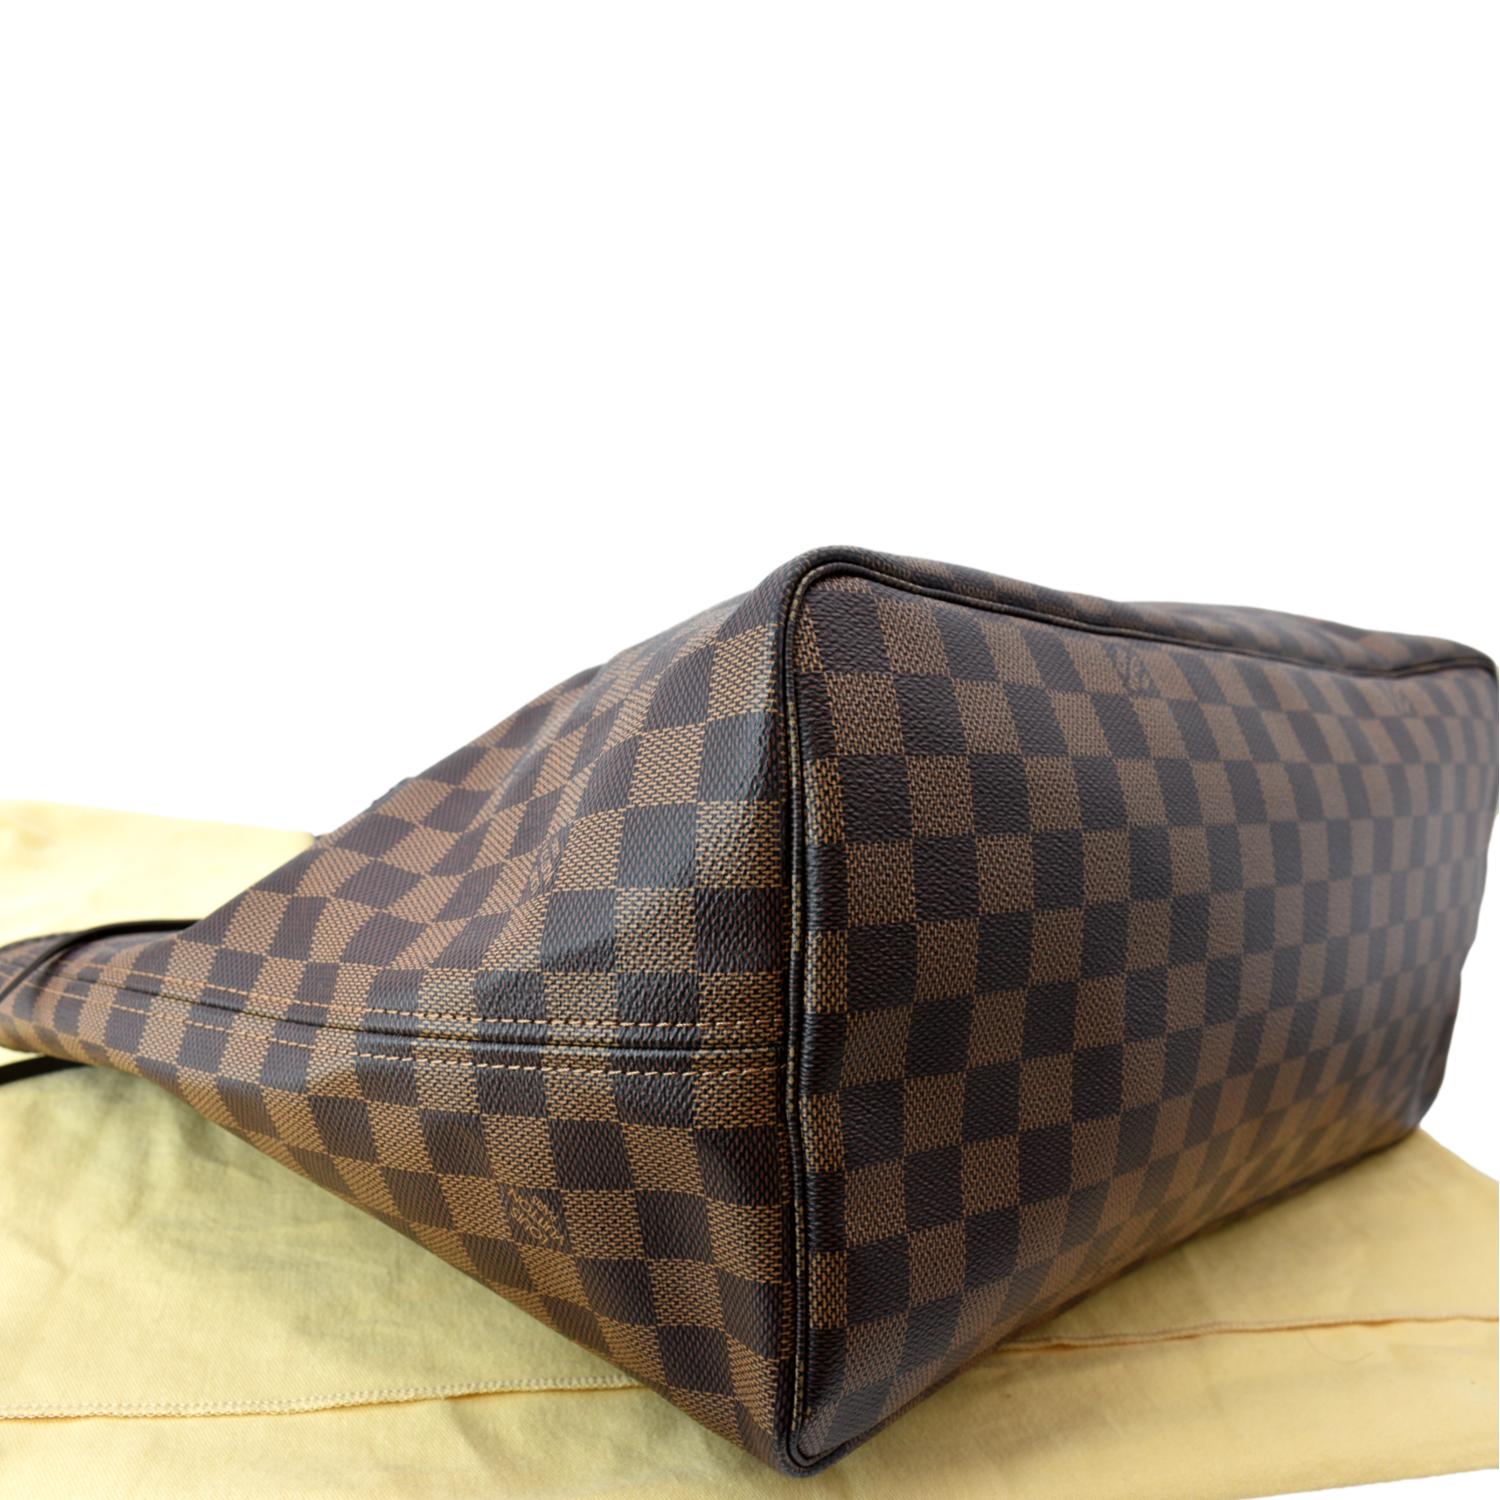 AUTHENTIC LOUIS VUITTON N51106 Damier Ebene Neverfull GM Tote Bag